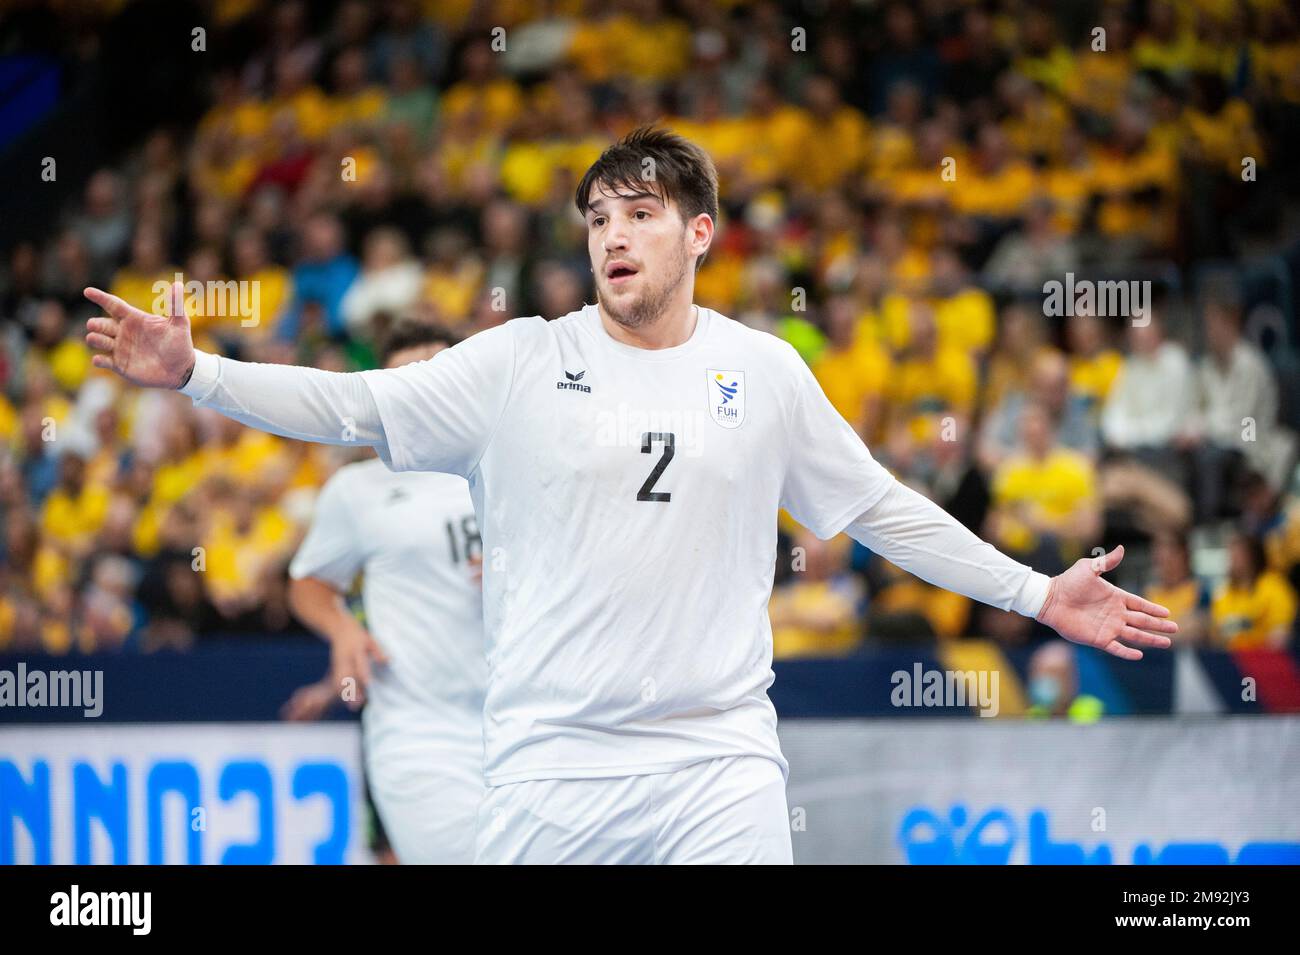 Gothenburg, Sweden. 16th Jan 2023. Gabriel Chaparro of Uruguay reacts during the 2023 IHF World Men’s Handball Championship game between Uruguay and Sweden on January 16th, 2023 in Gothenburg. Credit: Oskar Olteus / Alamy Live News Stock Photo